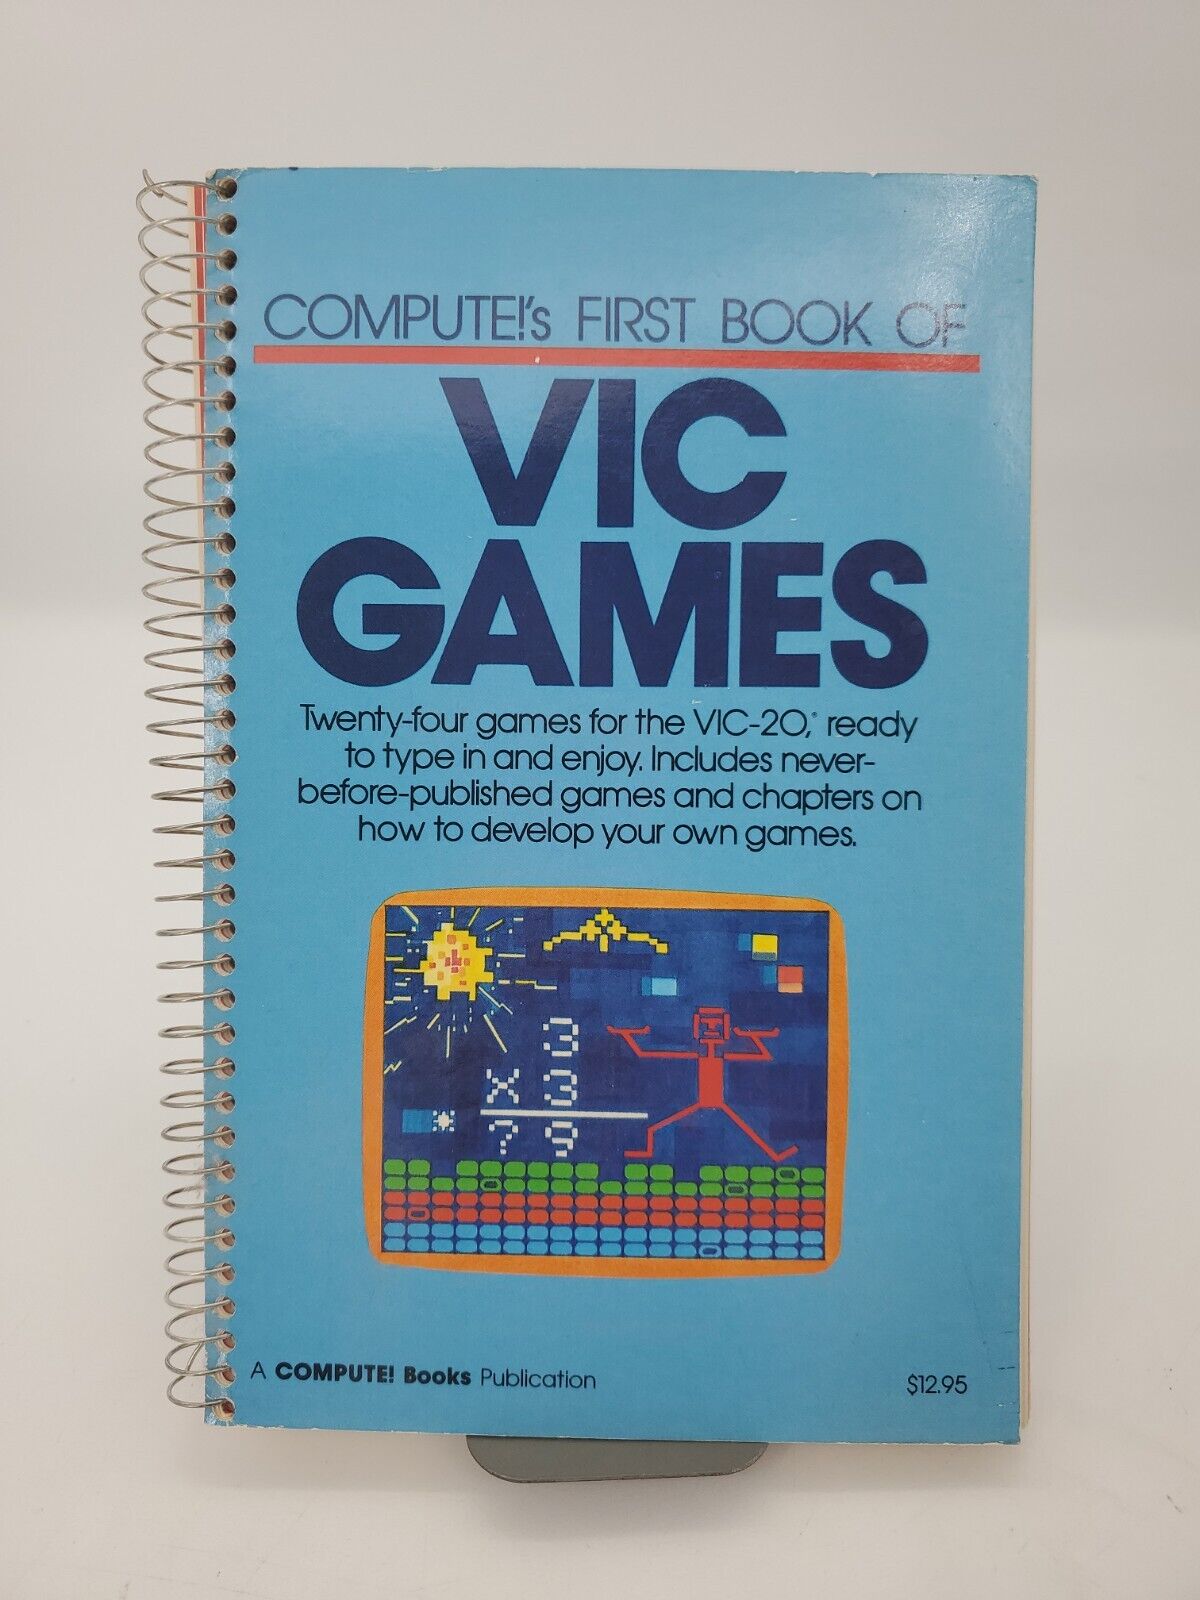 Compute's First Book on VIC Games - 24 games for VIC-20 - Vintage  1983